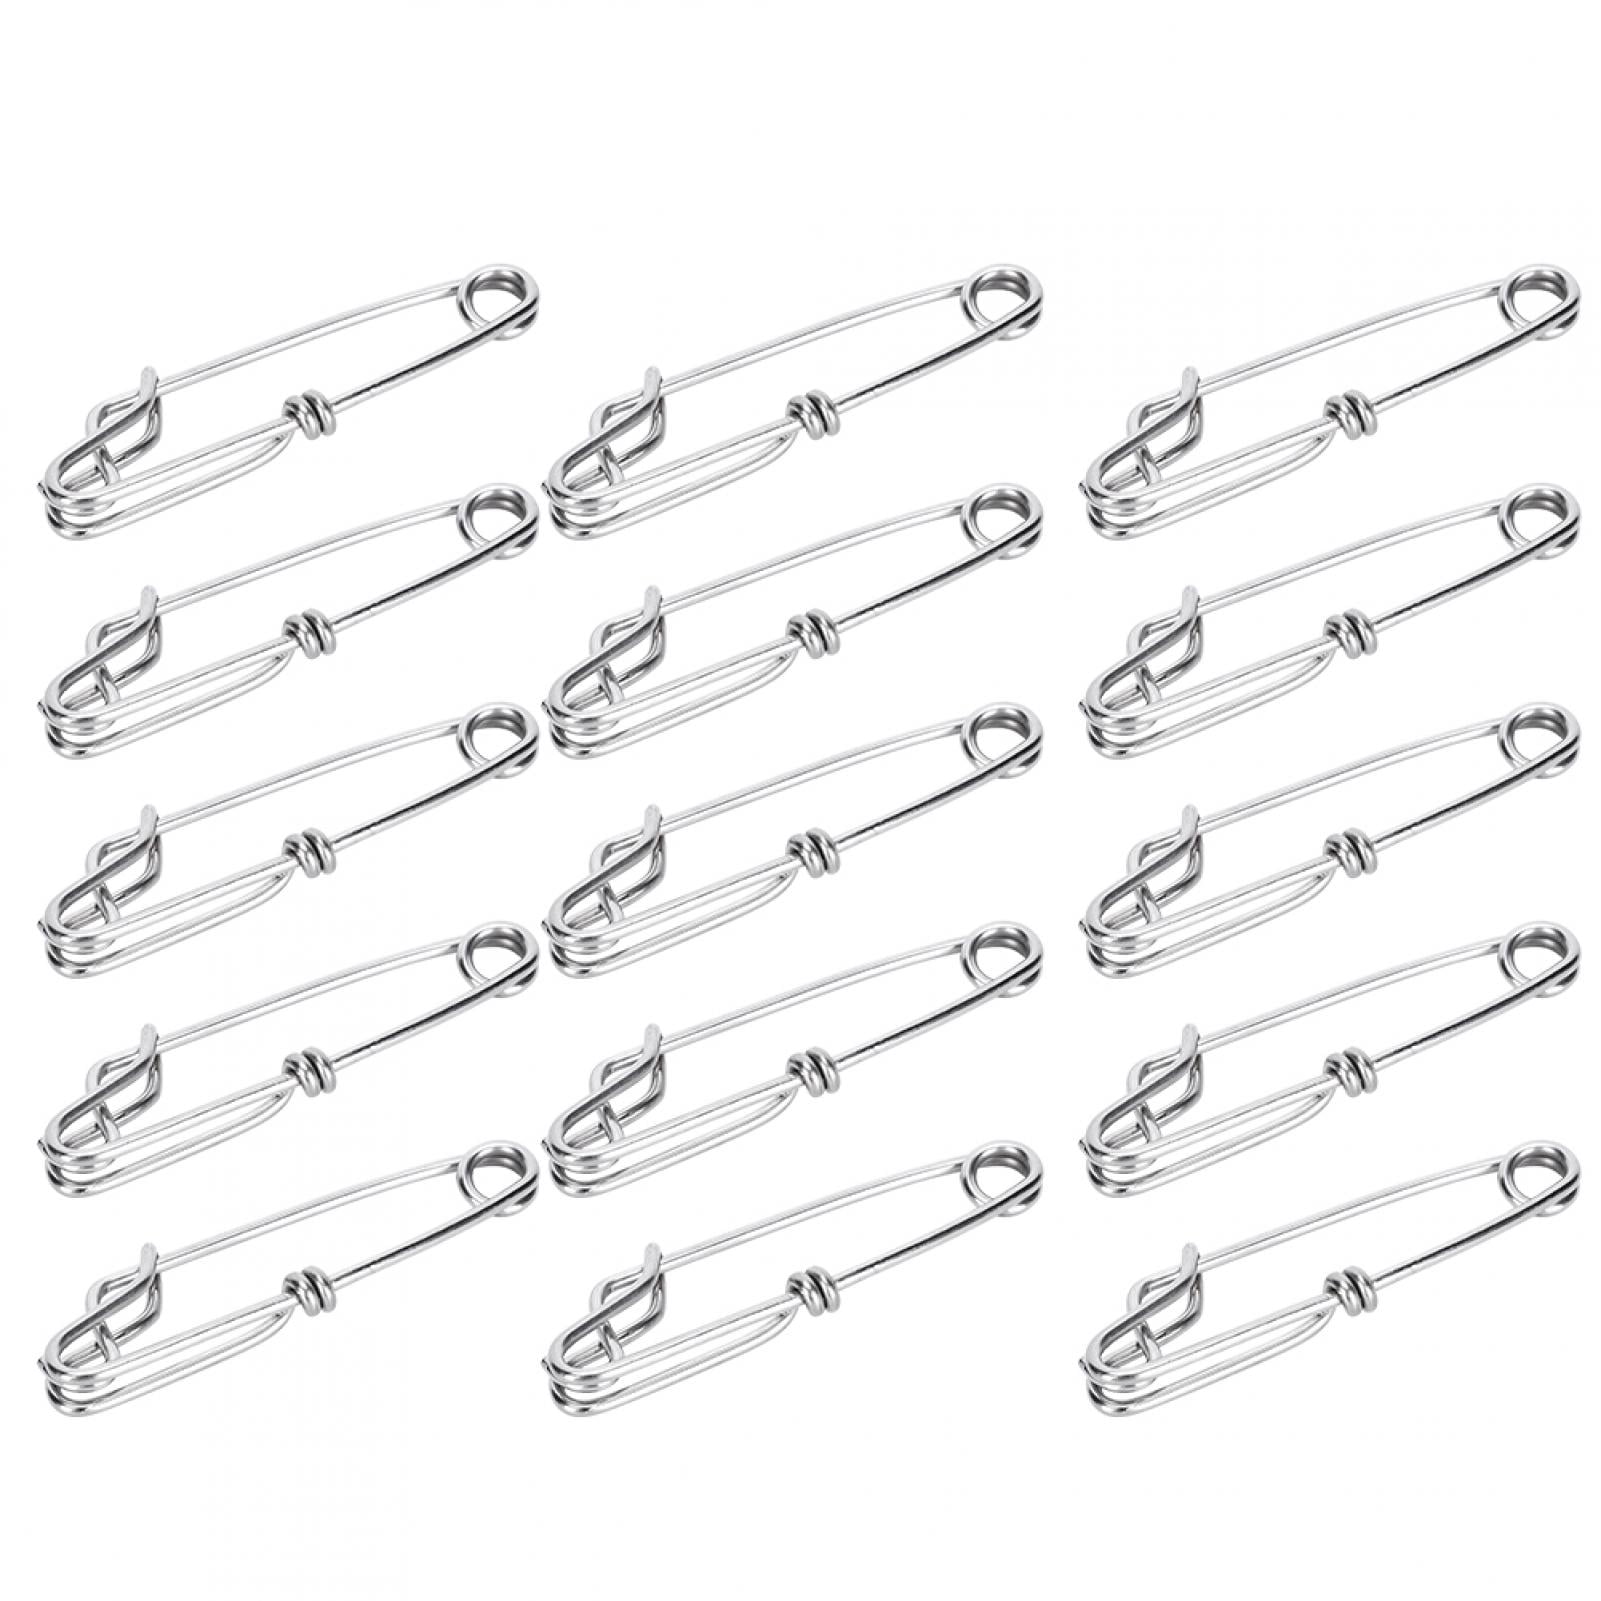 Tuna Clips 15pcs Stainless Steel Fishing Longline Snap For Long Line Fishing 